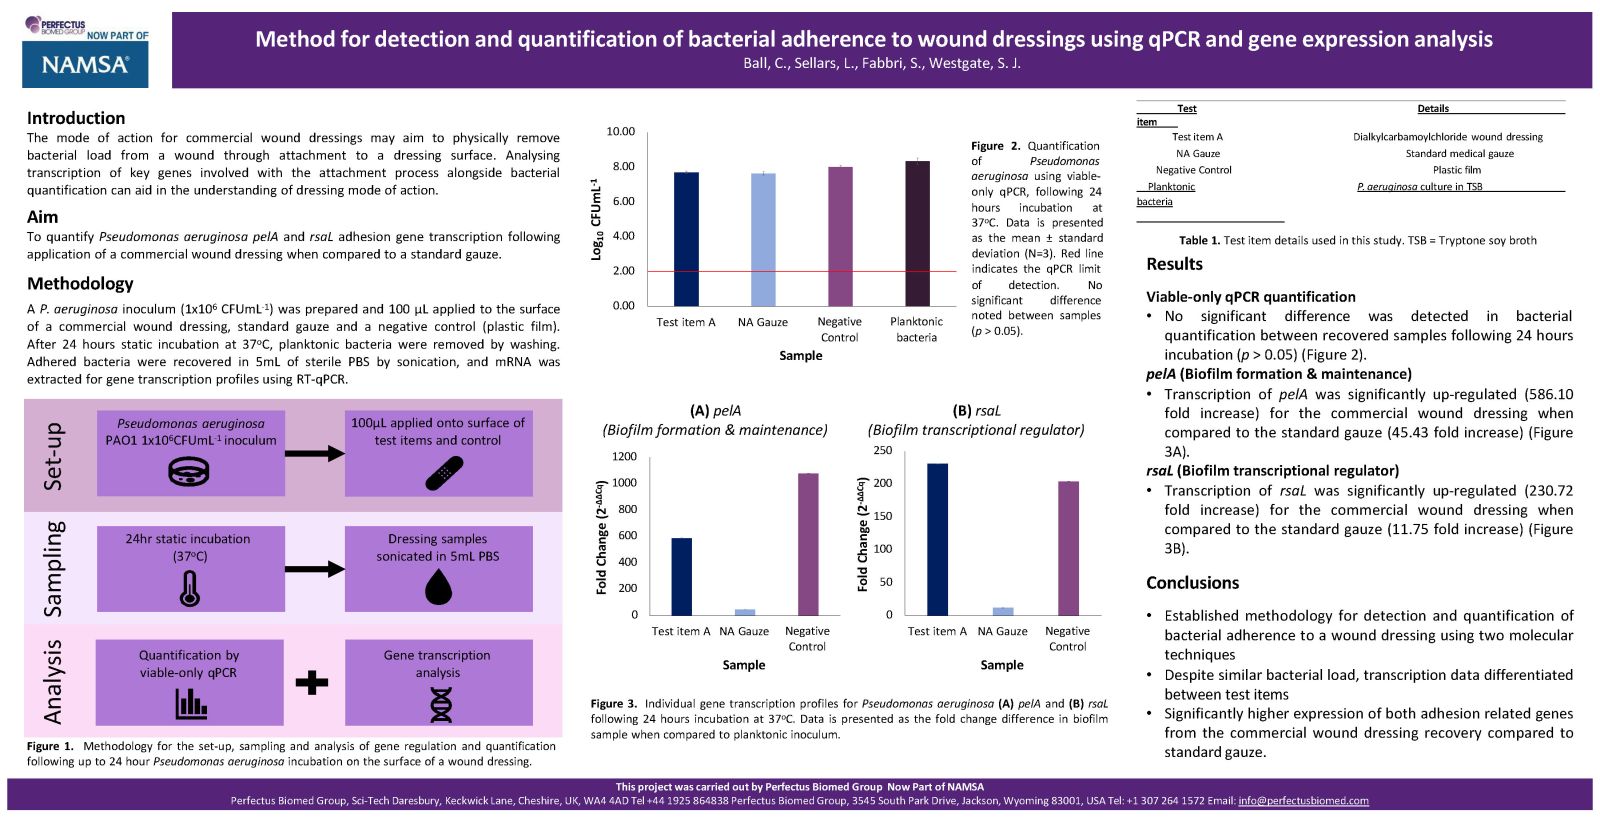 Method for detection and quantification of bacterial adherence to wound dressings using qPCR and gene expression analysis